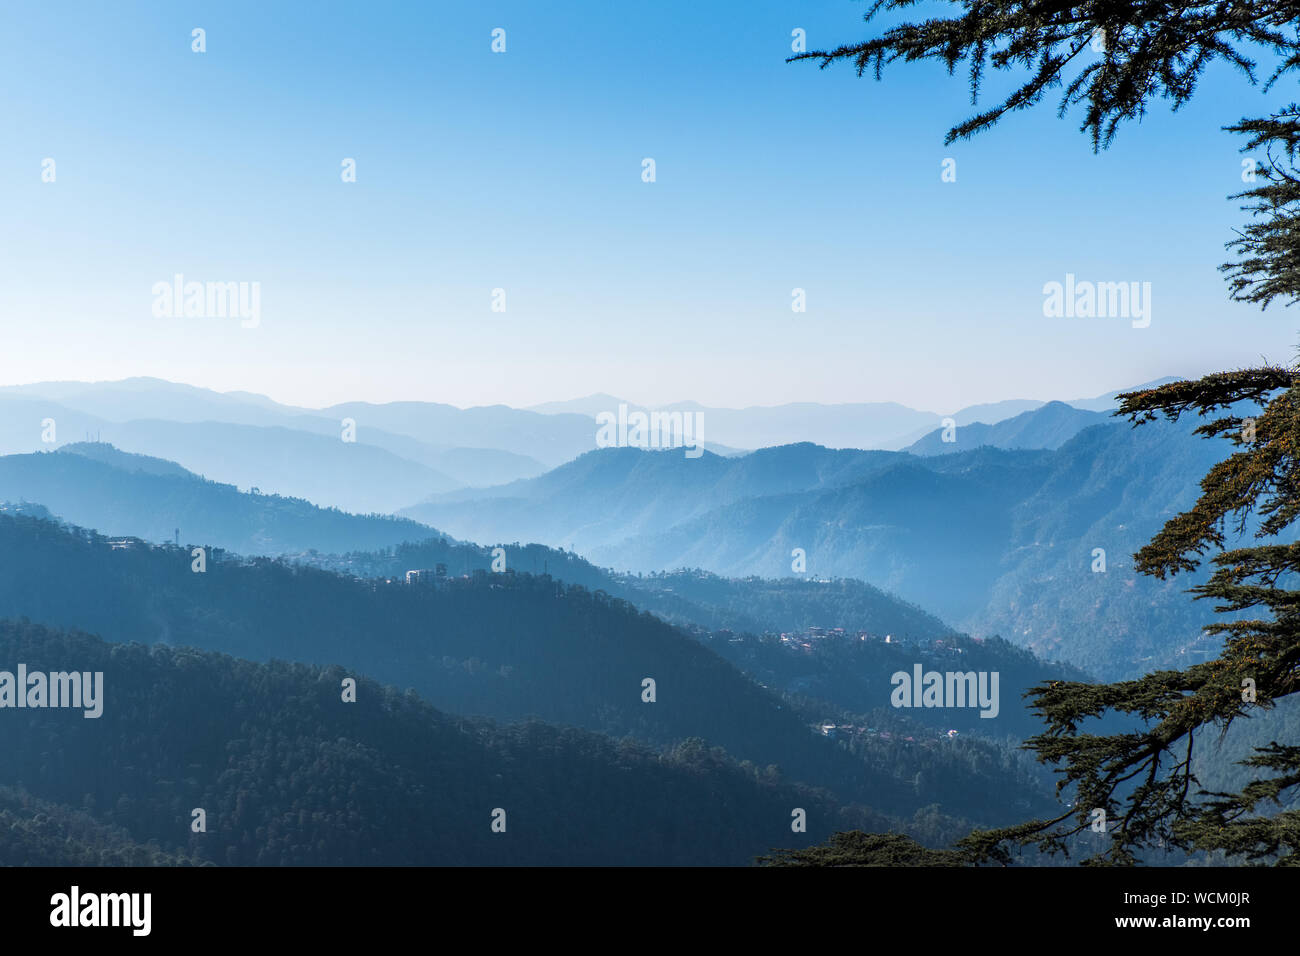 Misty, forested  hills near Shimla in the hills of northern India Stock Photo